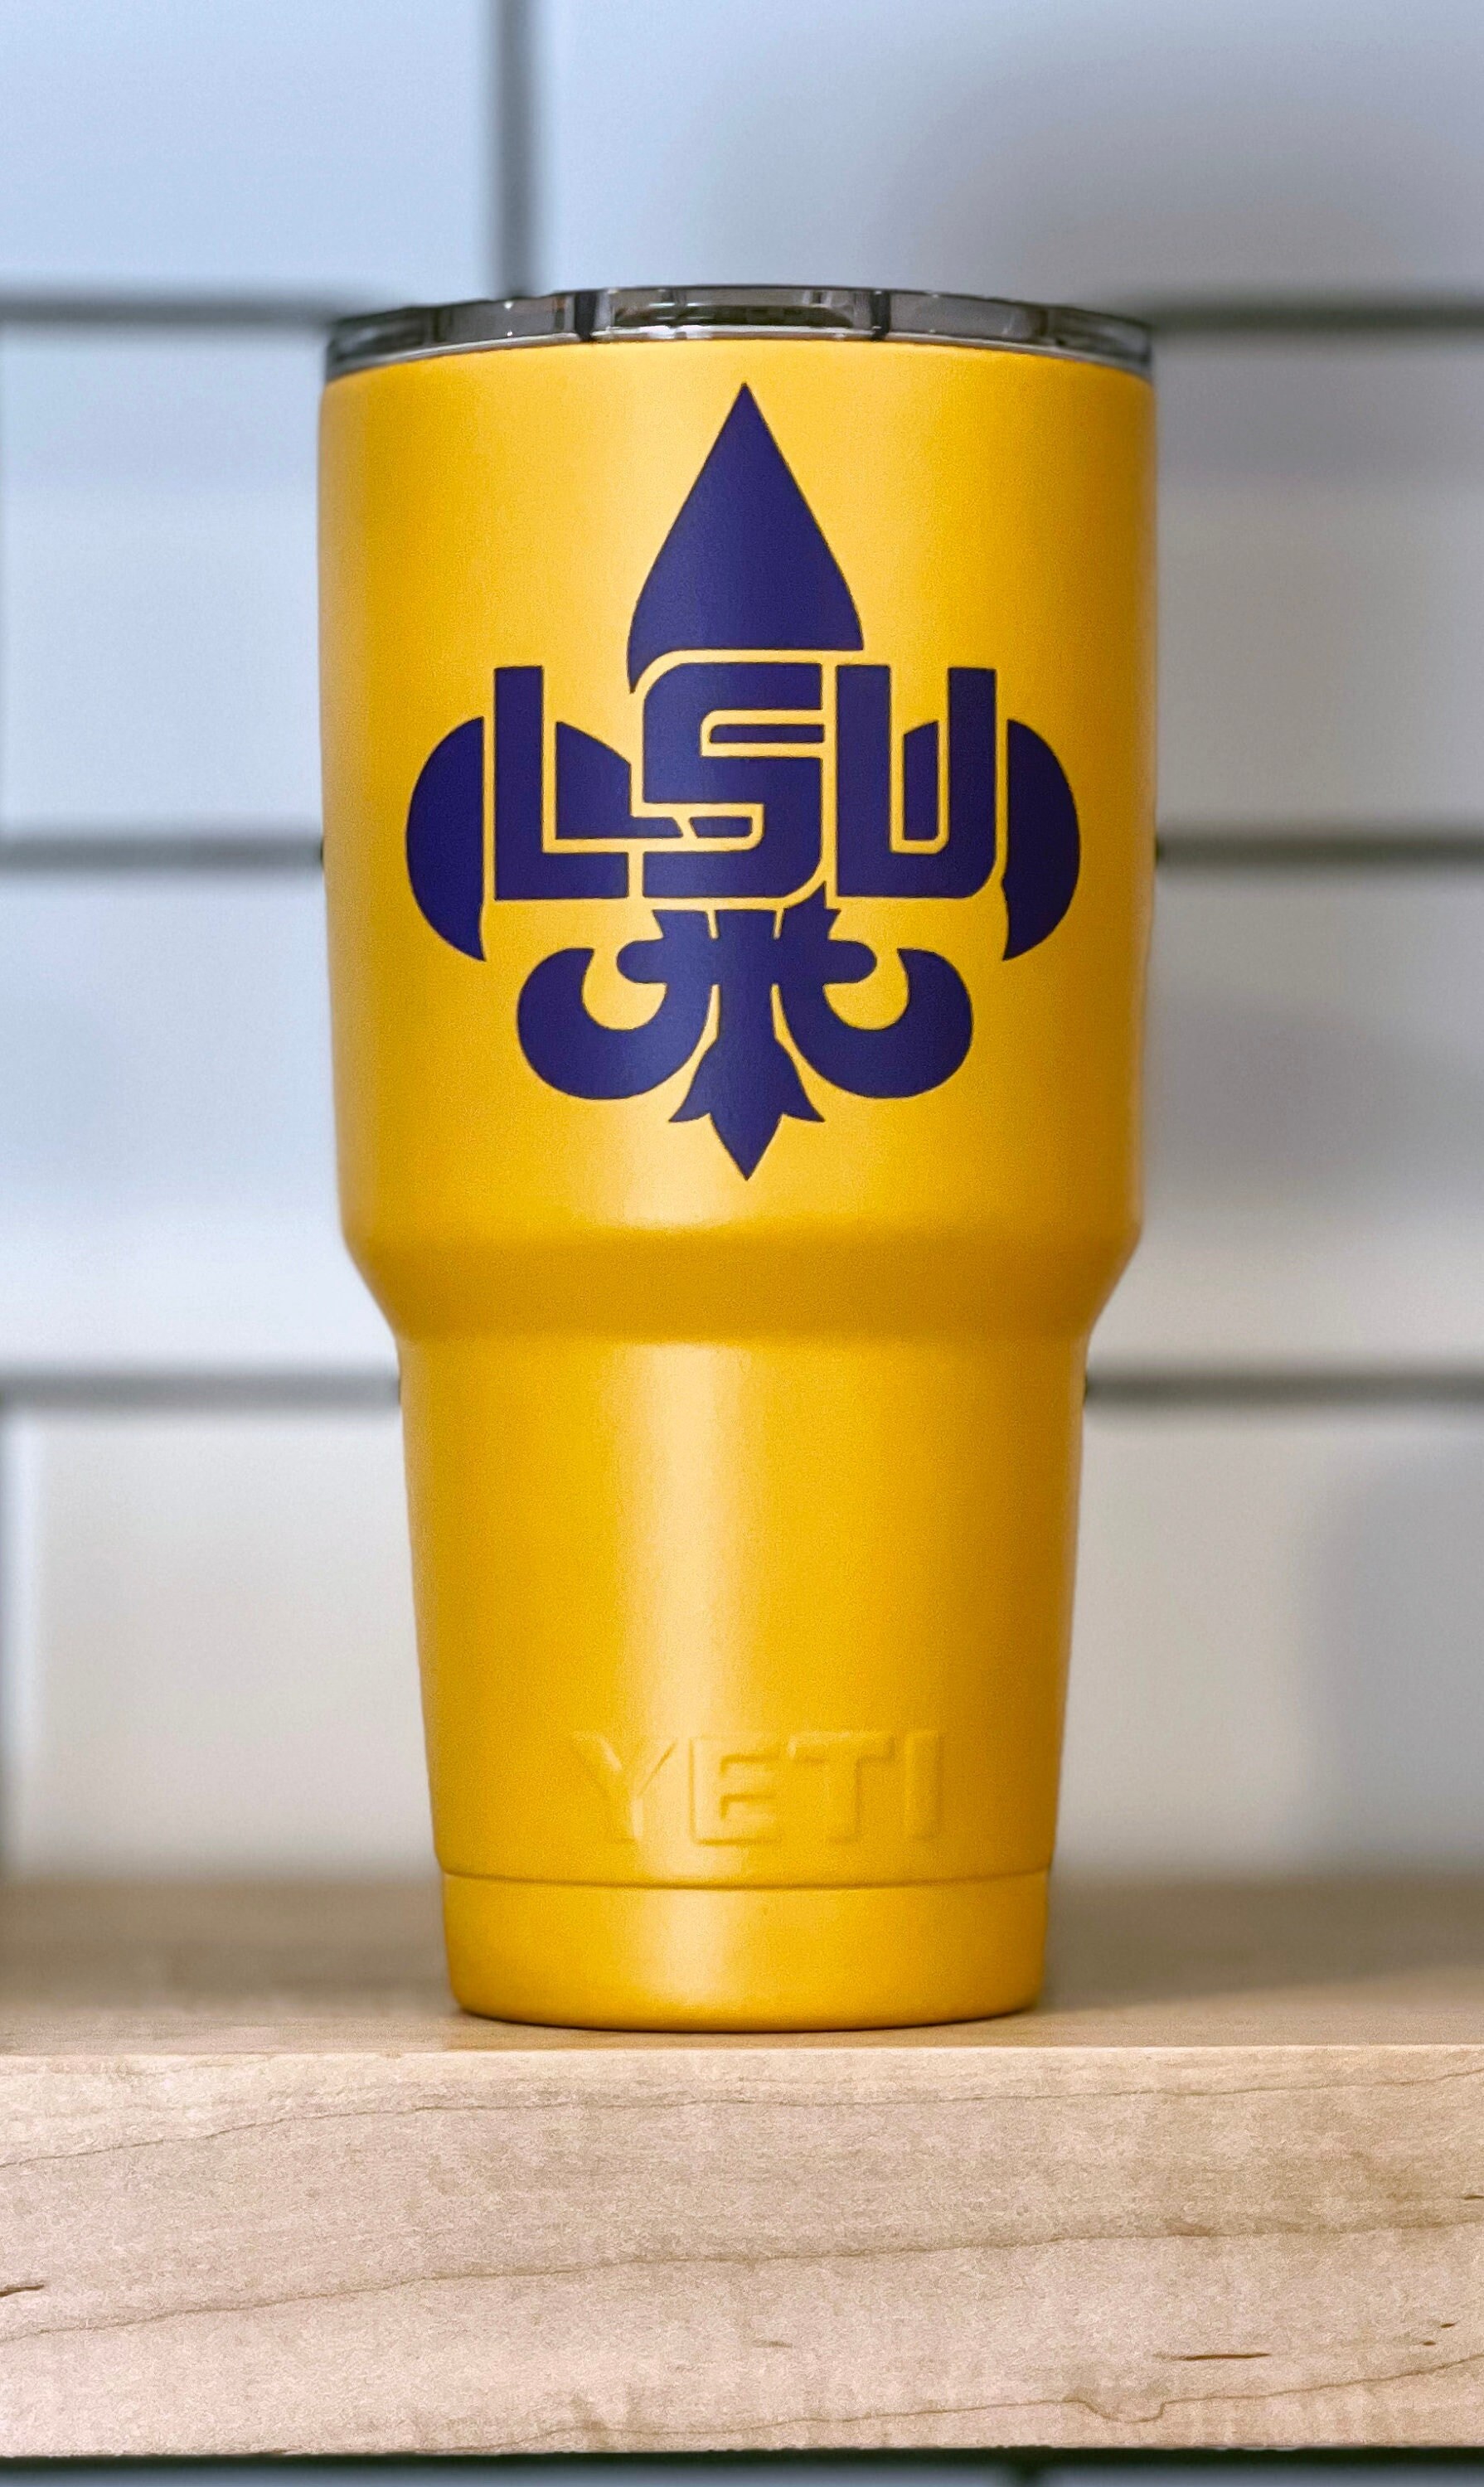 REDUCED Lsu/saints YETI 30-ounce Double-walled Stainless Steel